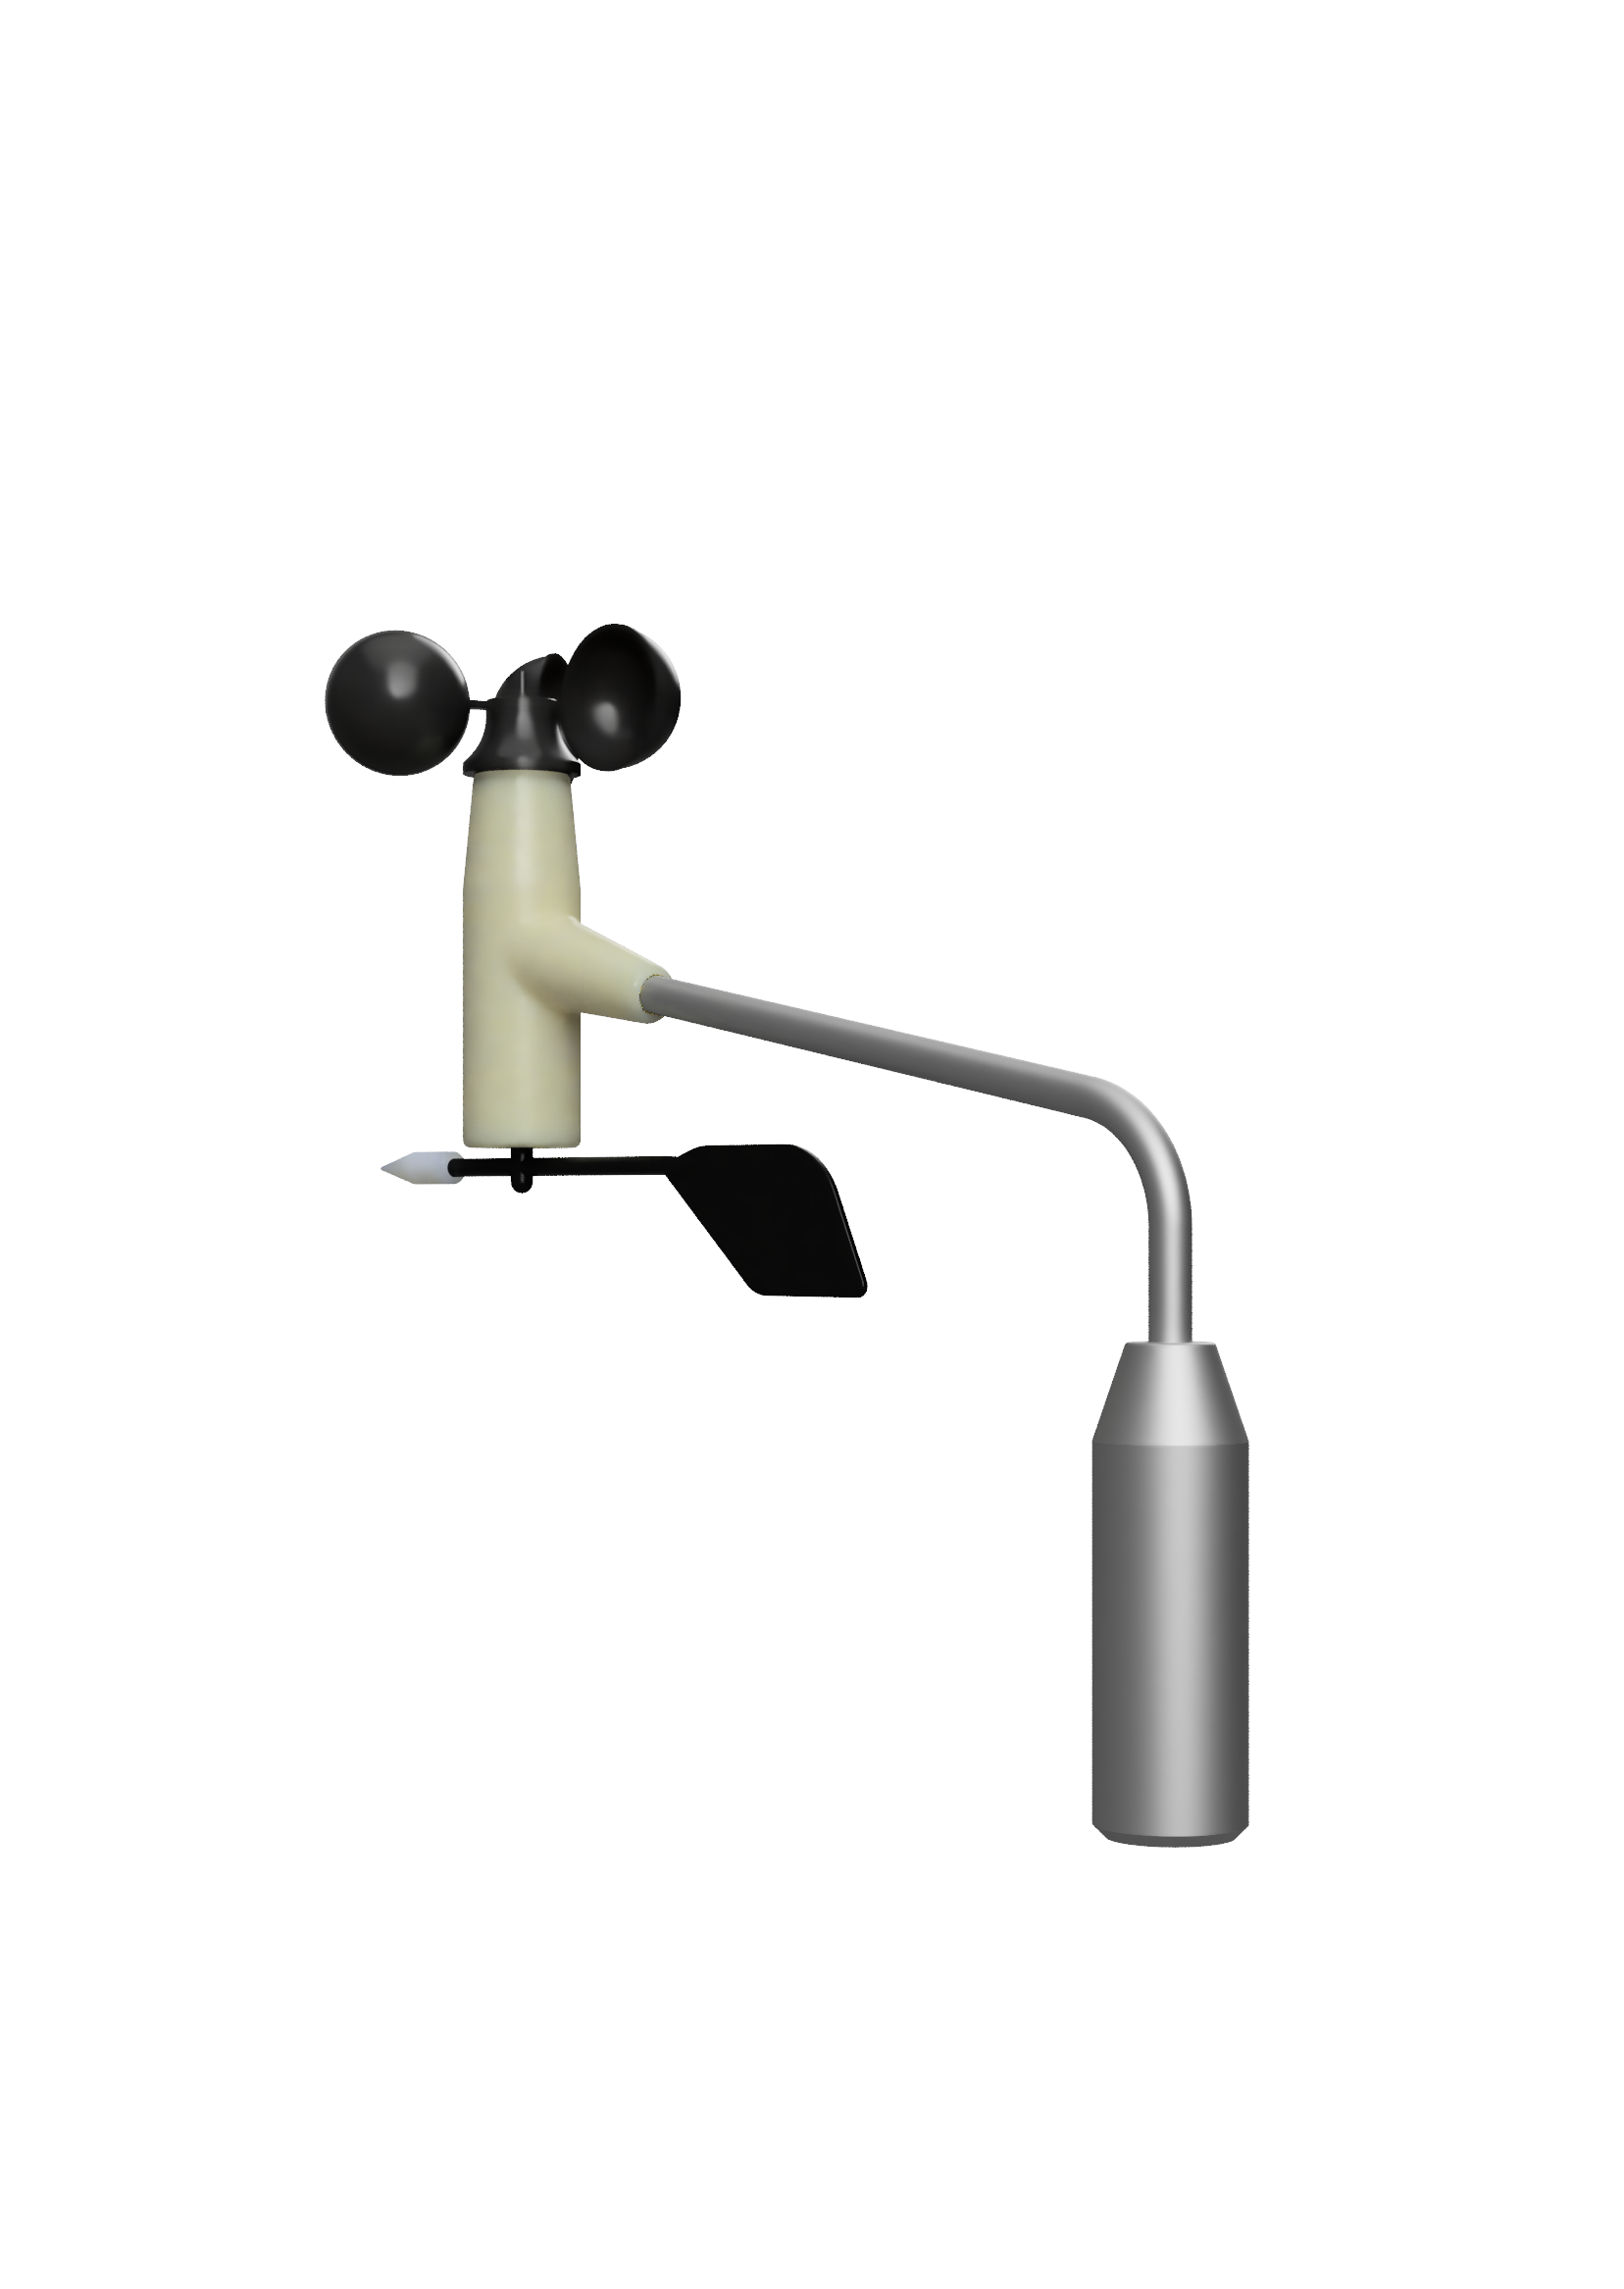 Meteo probe for wind speed and direction Wind speed with current output / 4 - 20 mA  Type: f.566.24.28